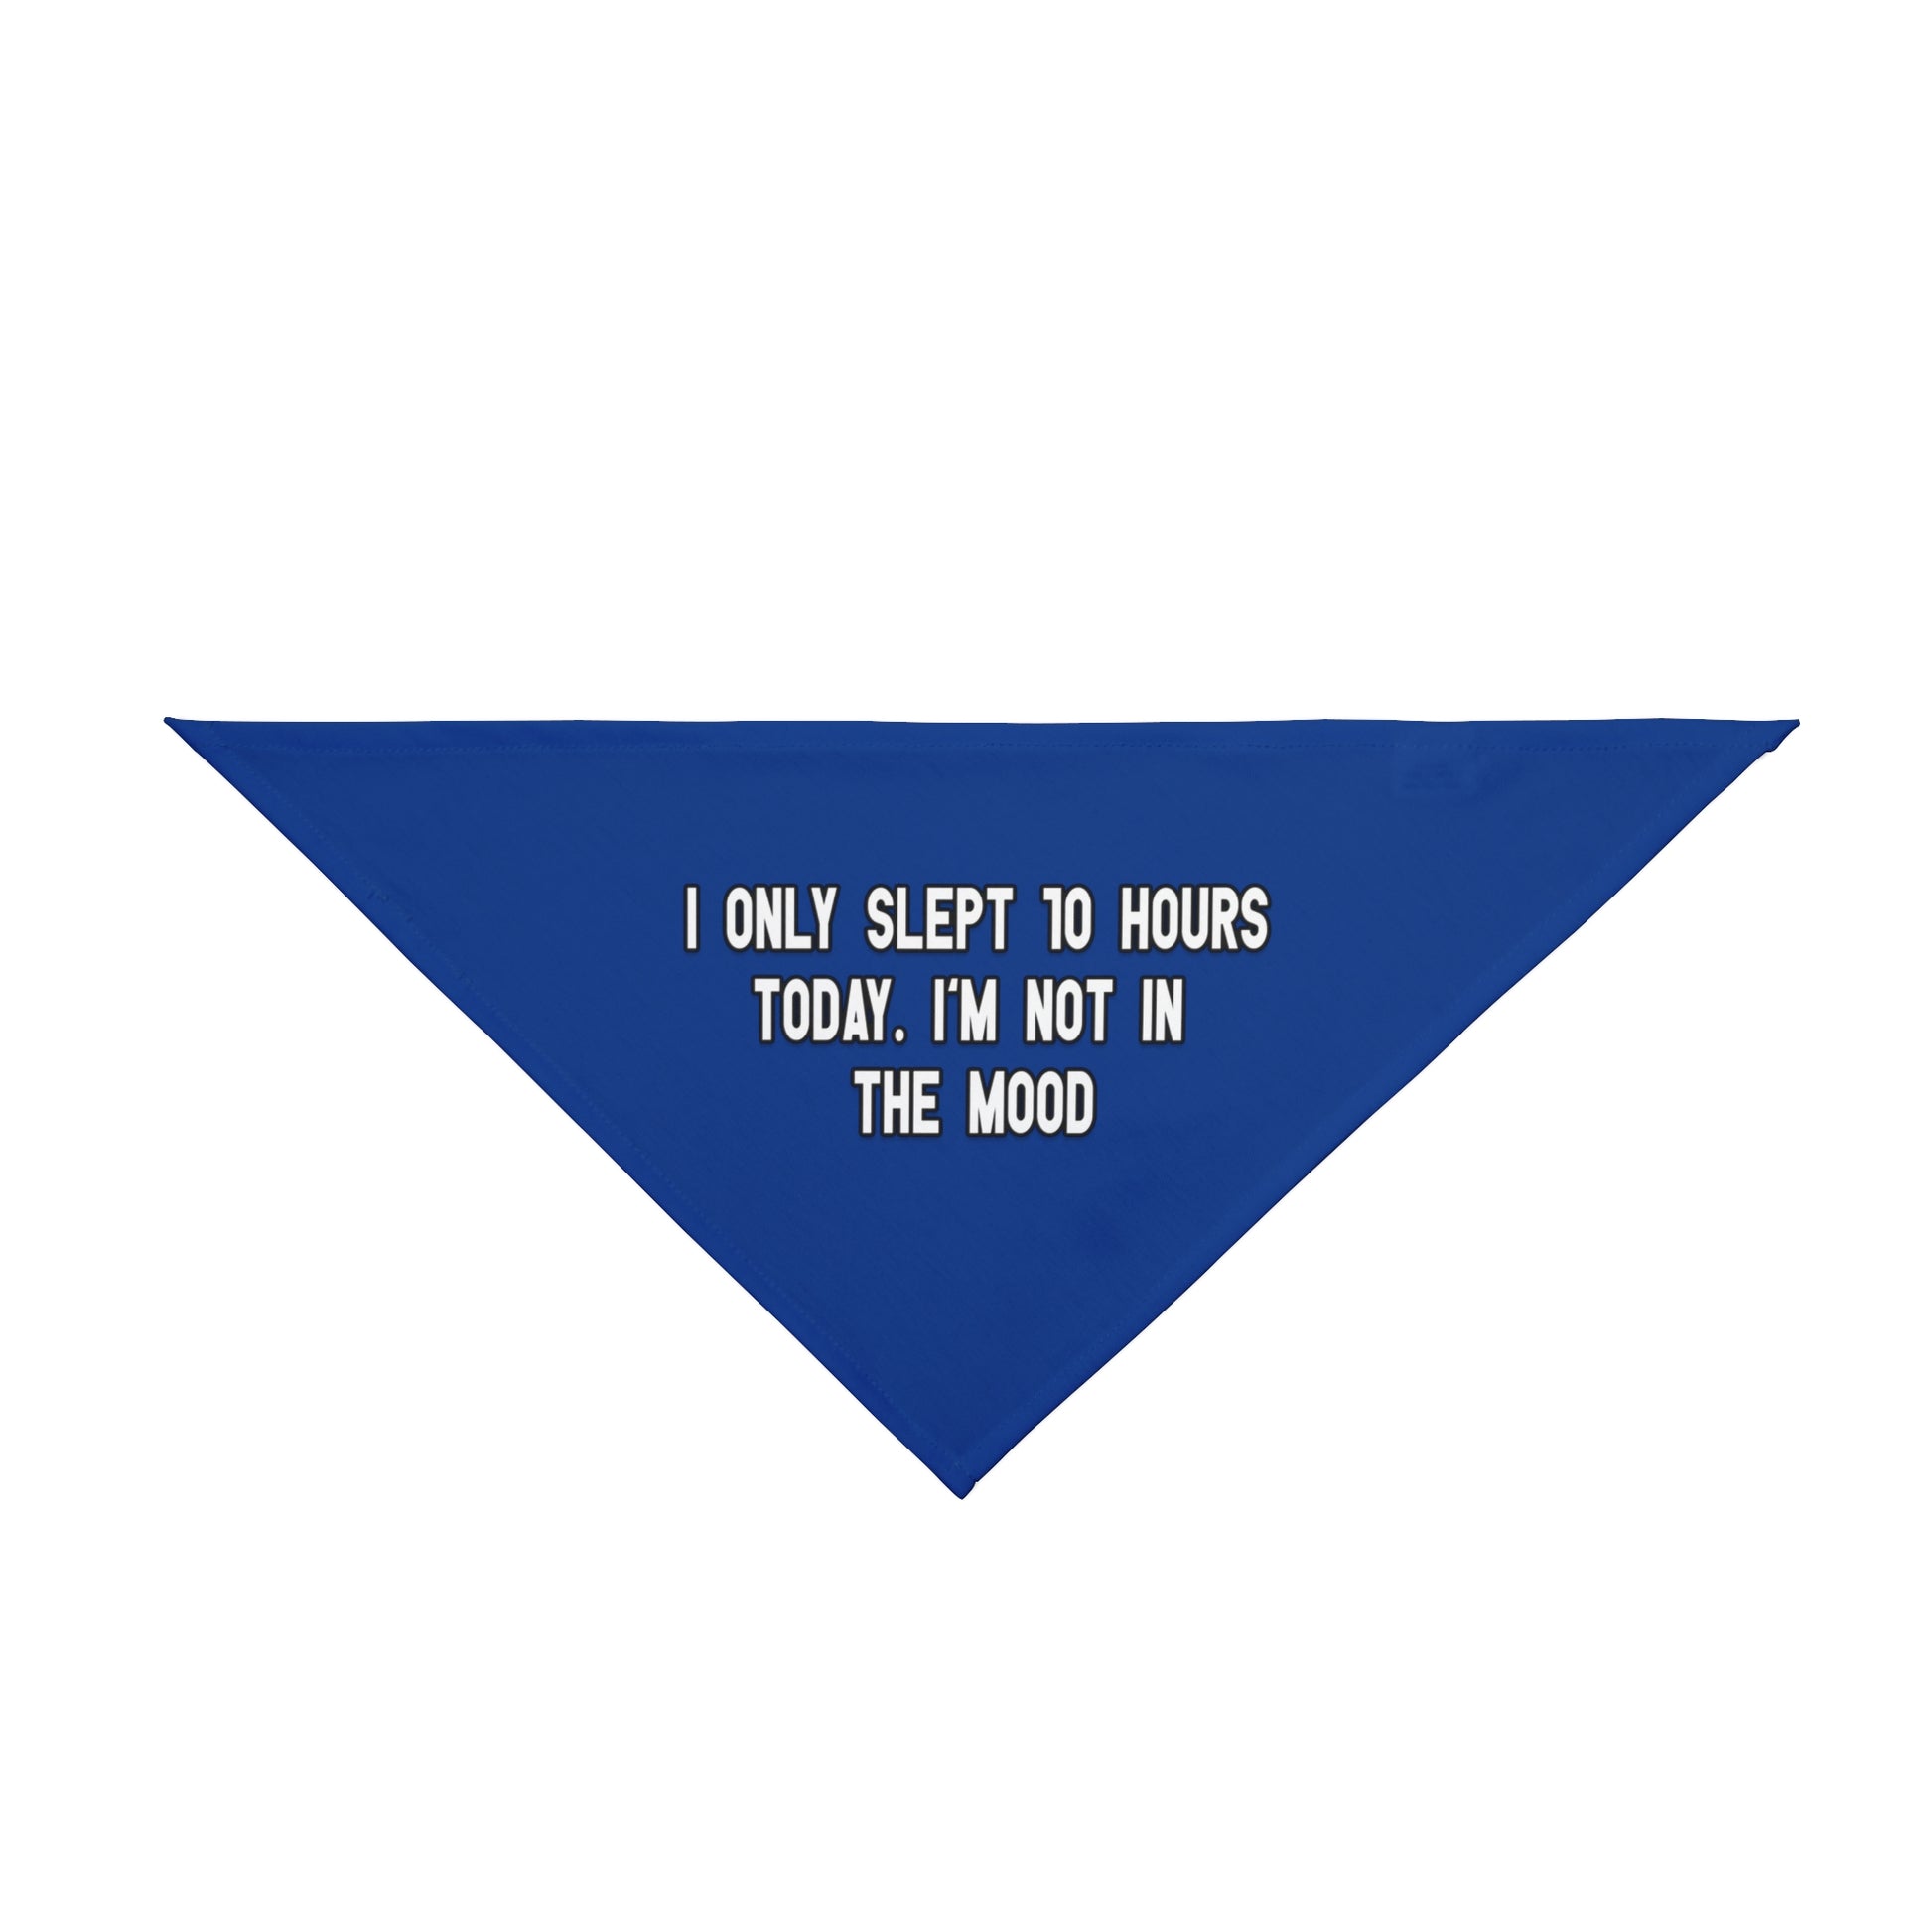 A bandana with the message: I ONLY SLEPT 10 HOURS TODAY. I'M NOT IN THE MOOD . Bandana's Color is blue